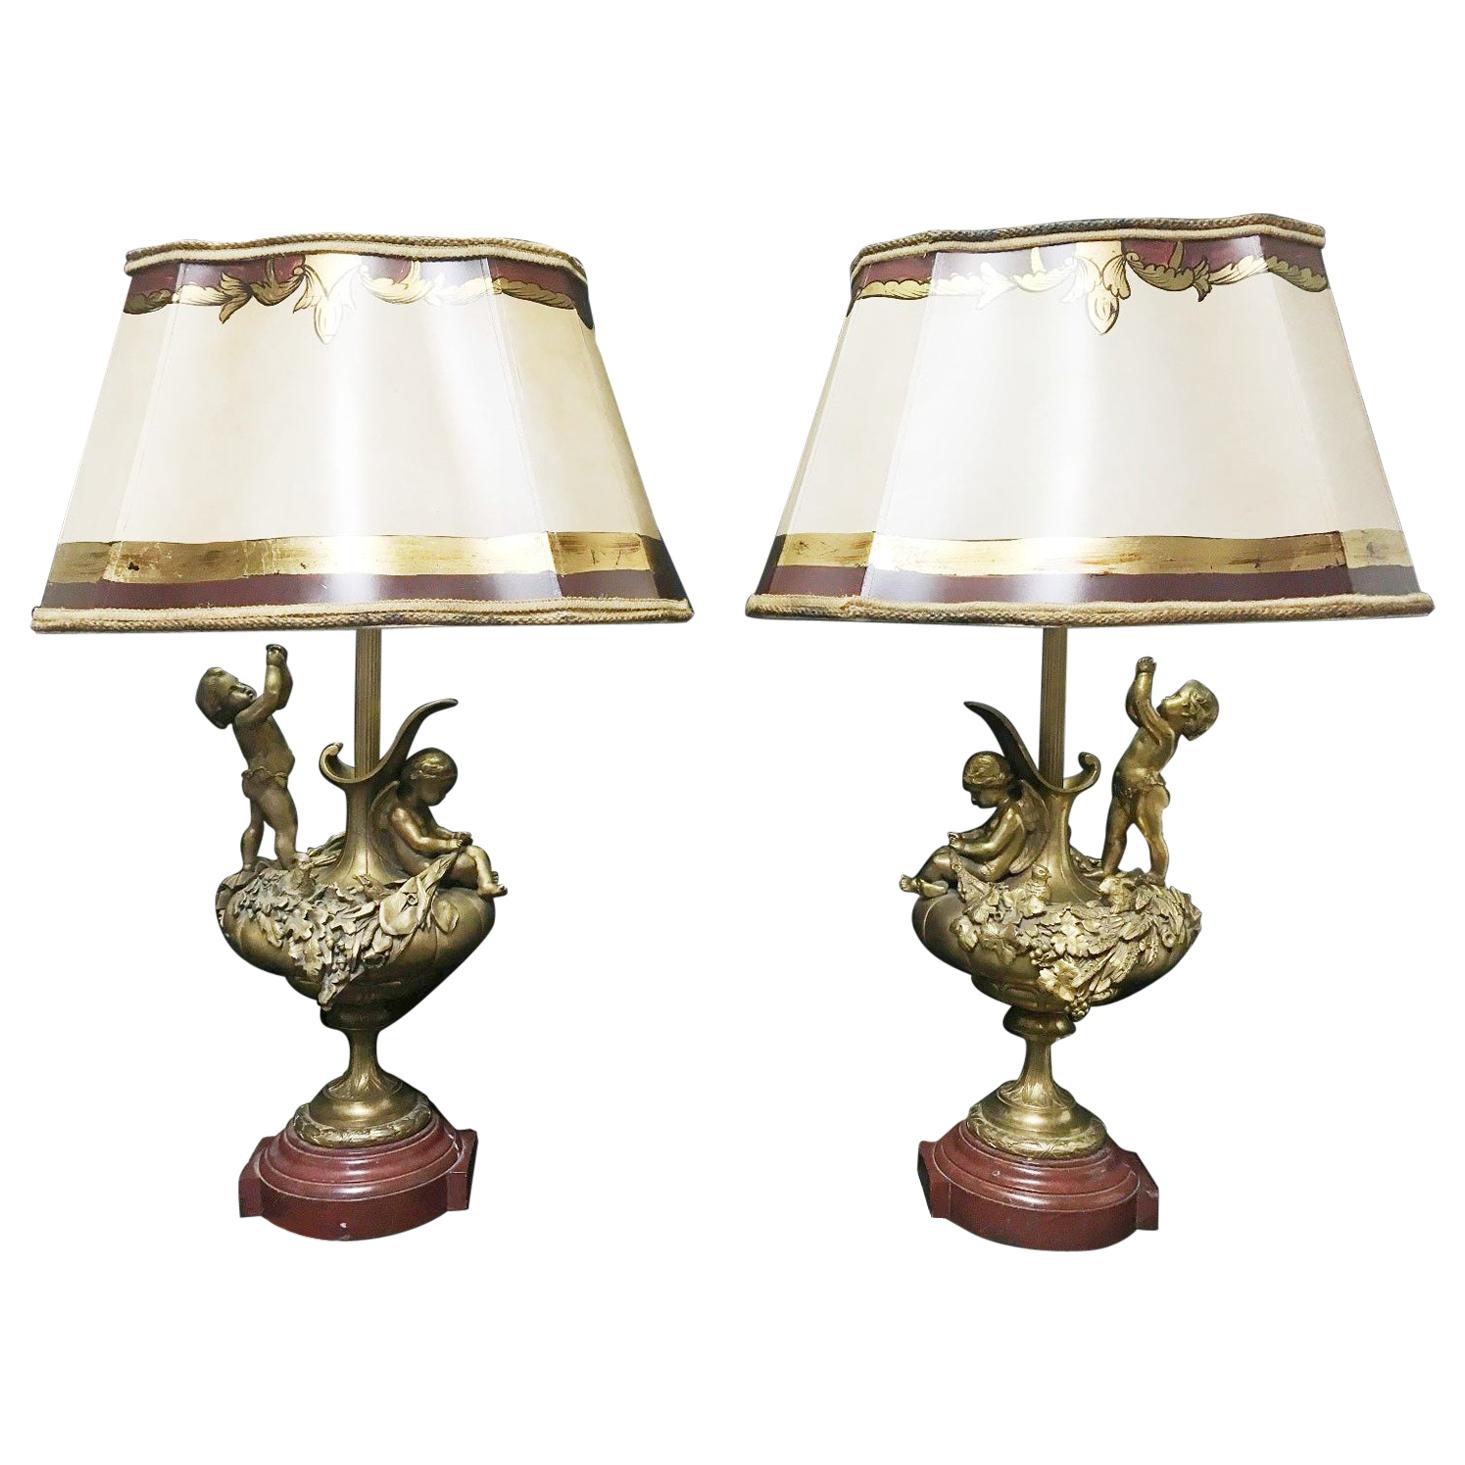 Pair of French Ormolu Figural Lamps, 19th Century